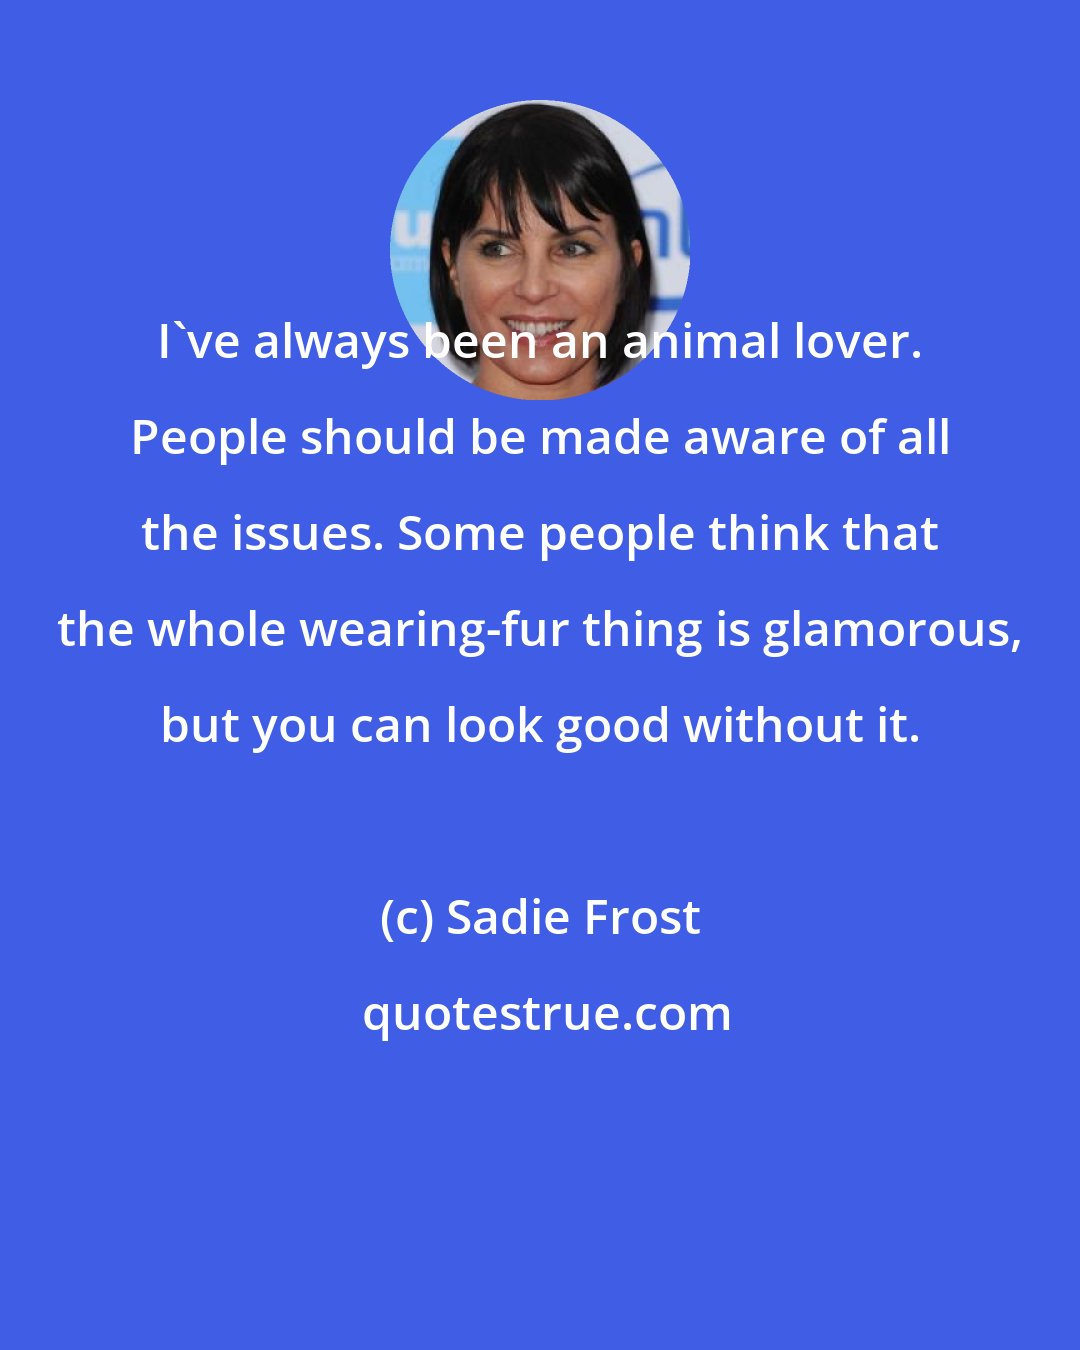 Sadie Frost: I've always been an animal lover. People should be made aware of all the issues. Some people think that the whole wearing-fur thing is glamorous, but you can look good without it.